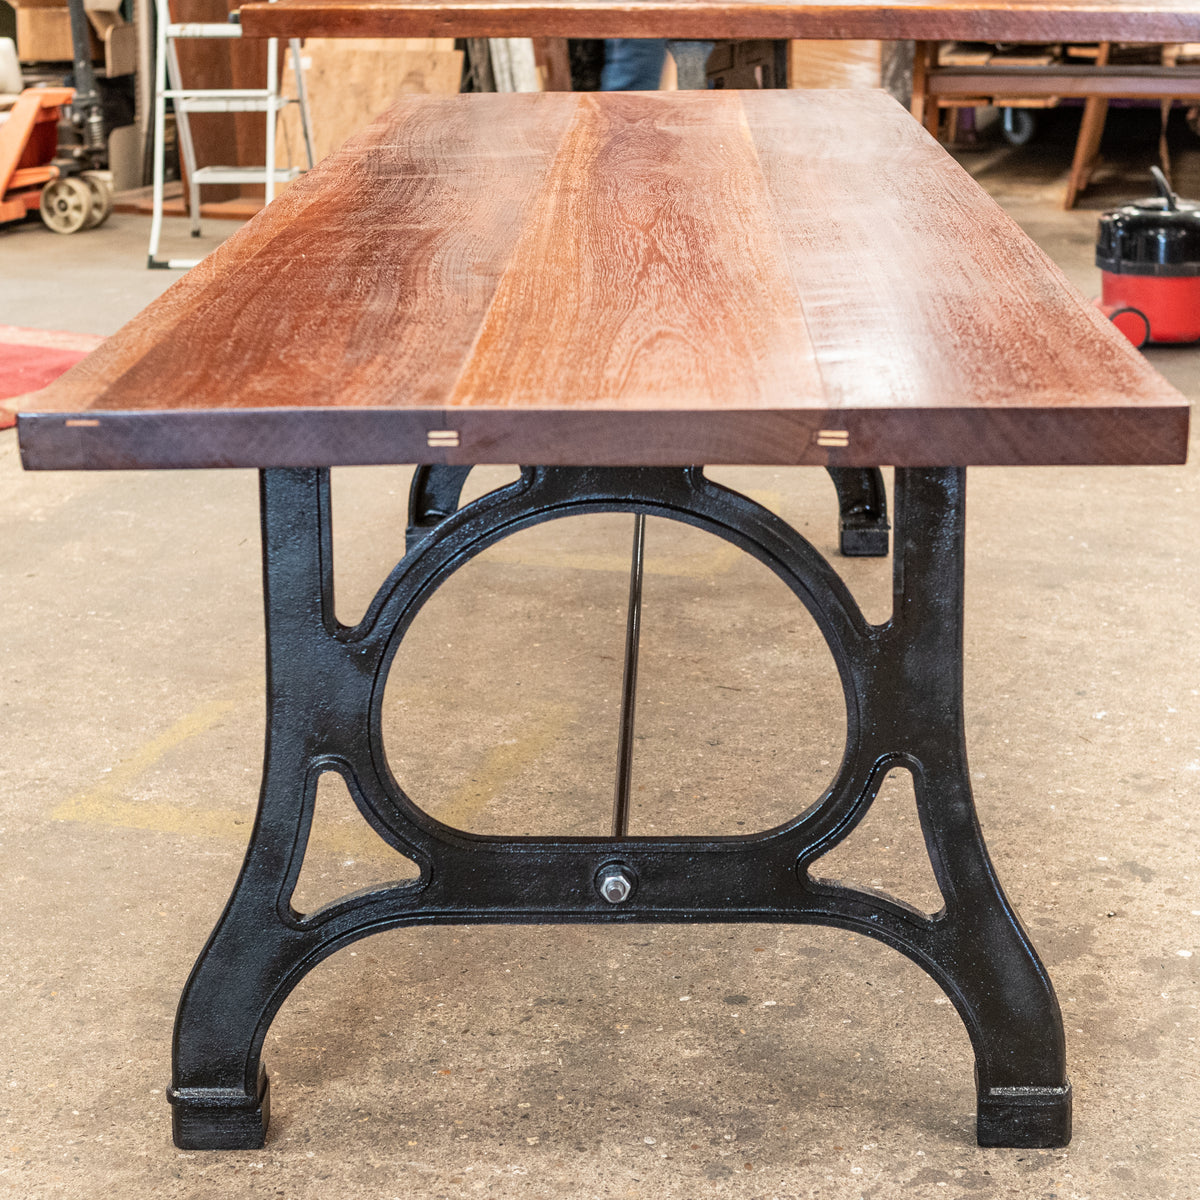 Teak Plank TopTable With Industrial Cast Iron Legs | The Architectural Forum